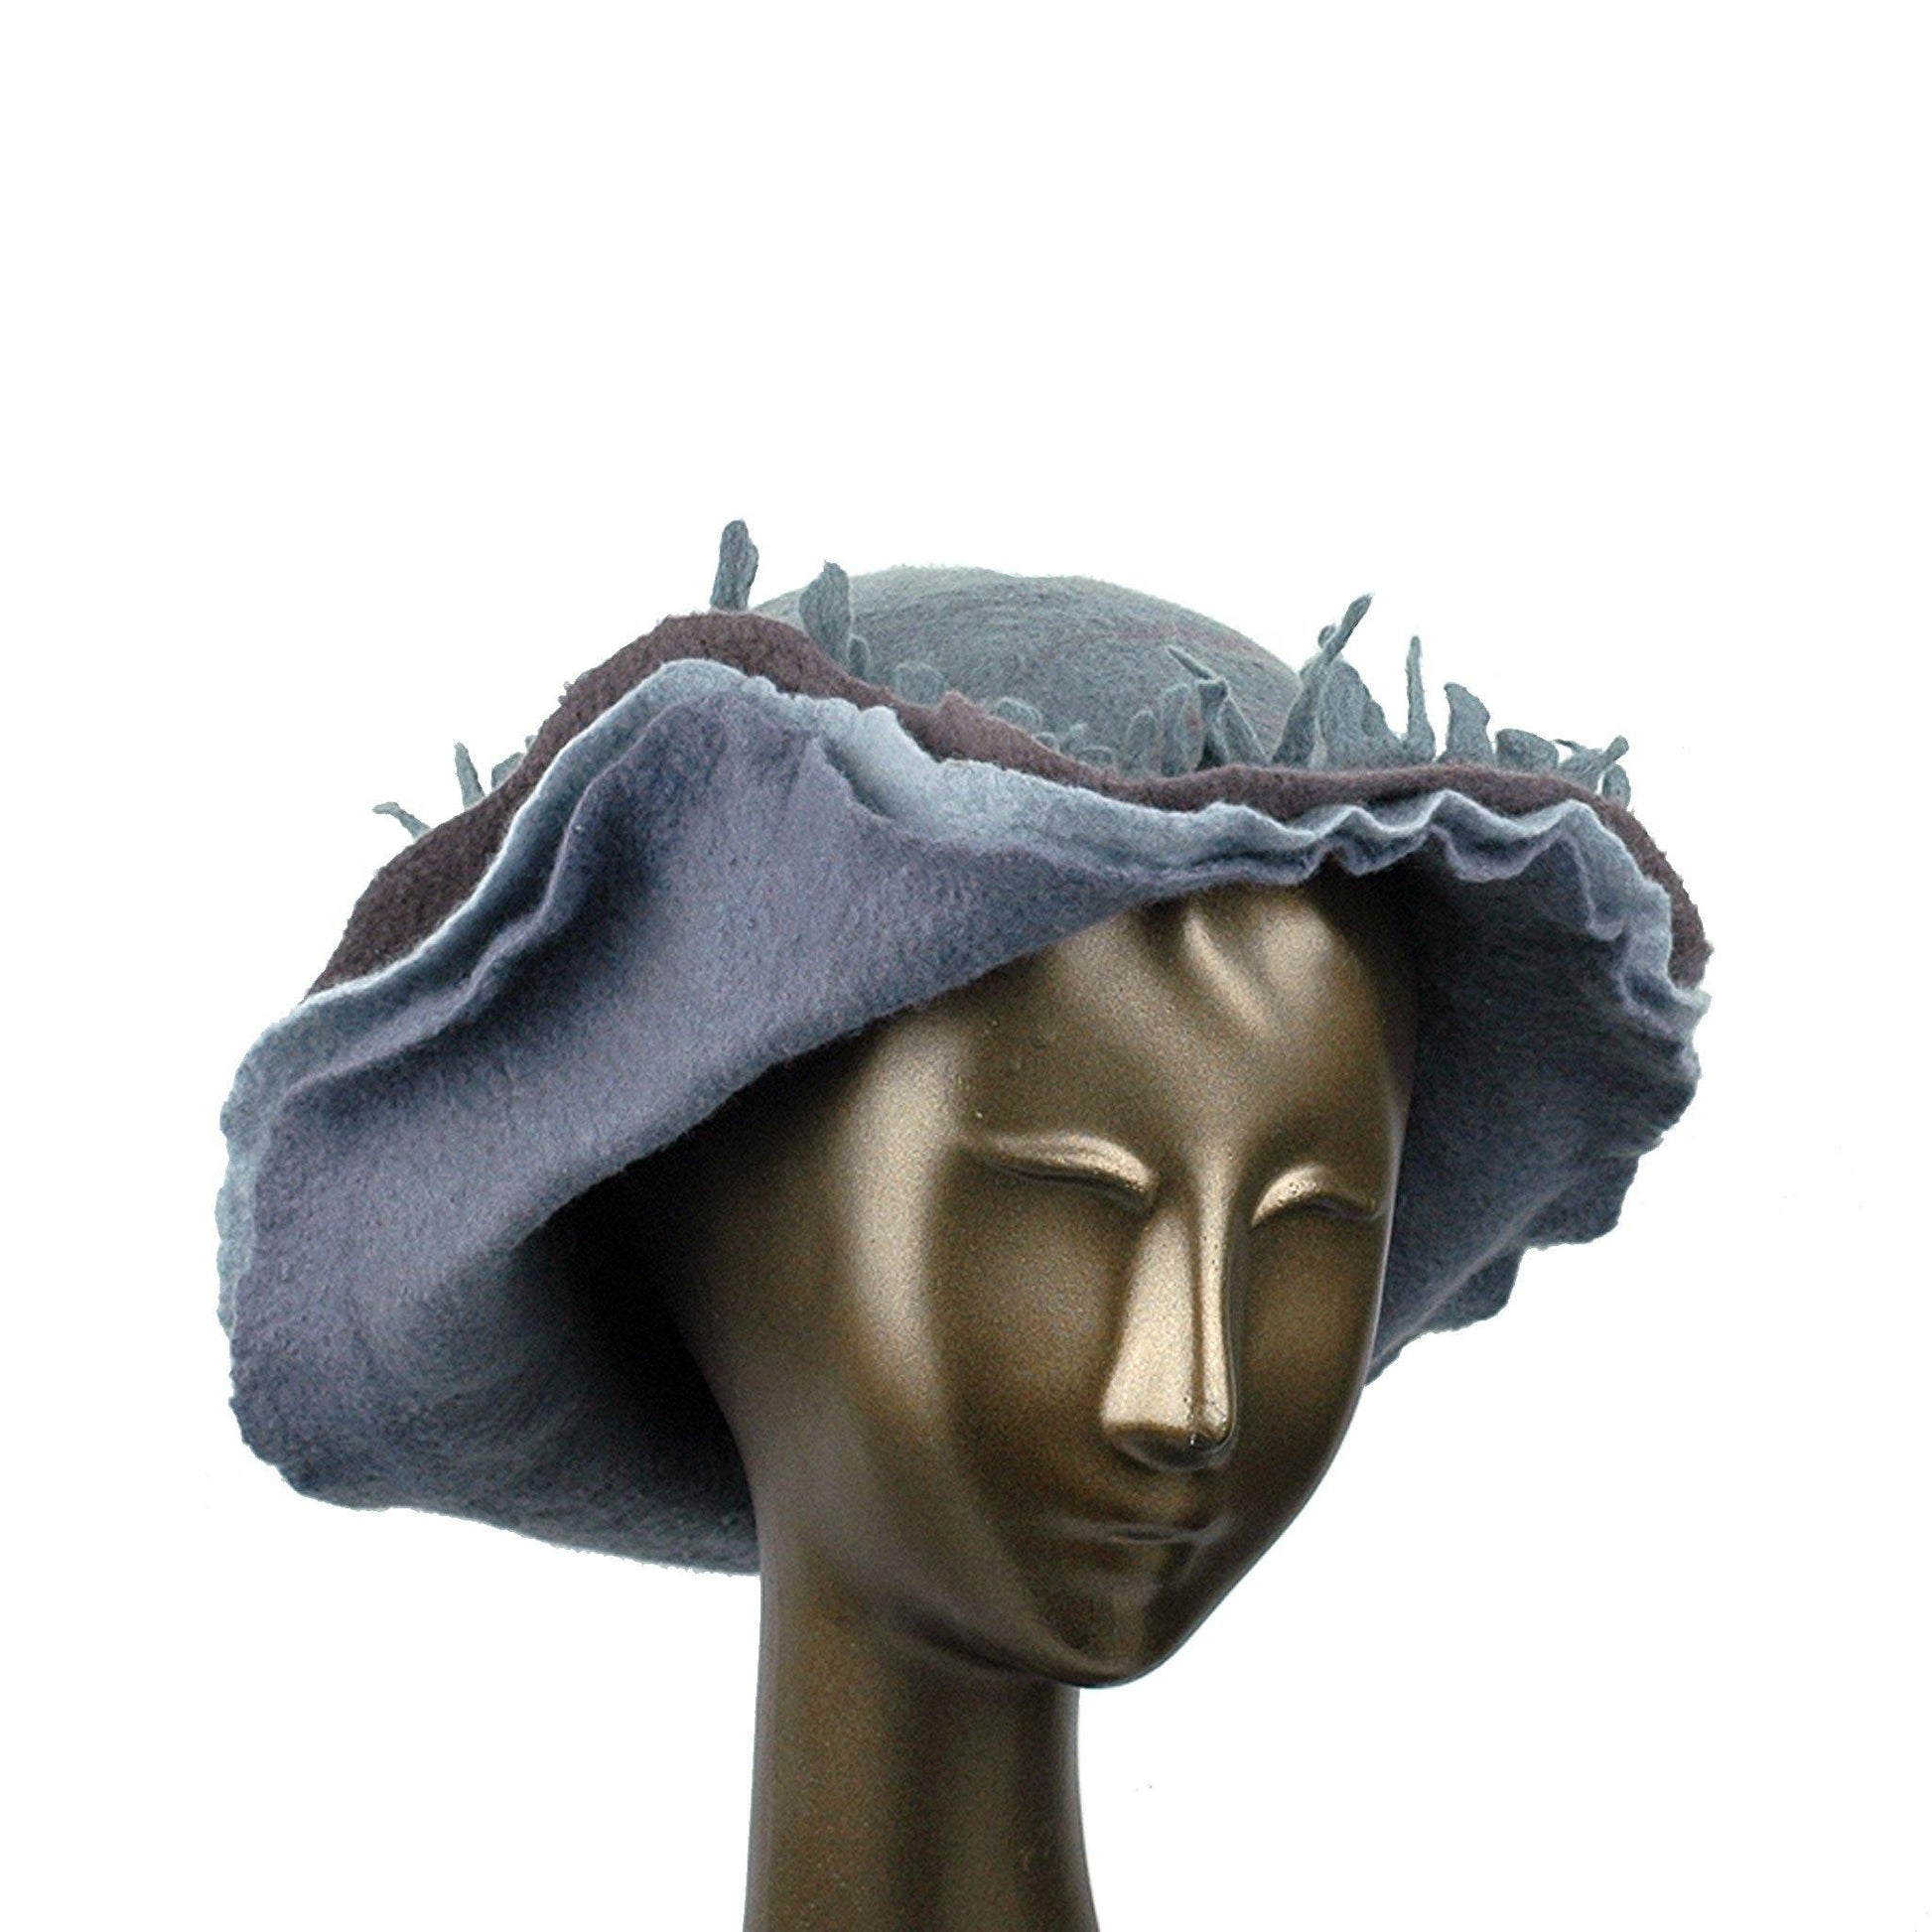 Wide Brimmed Felted Hat with Fringe in Neutral Colors - three quarters view